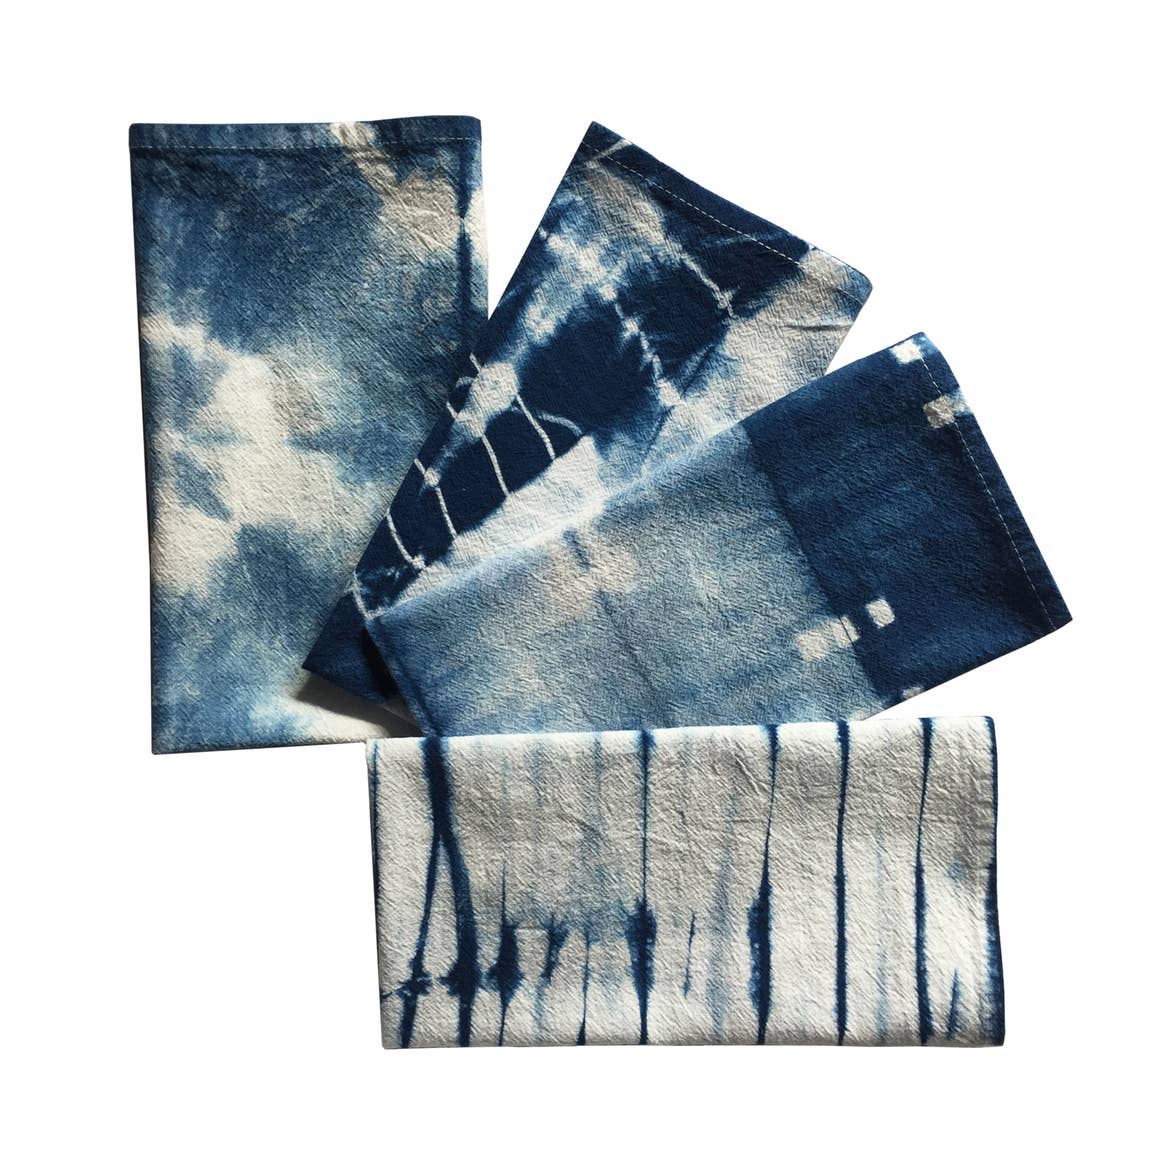 Linen Cotton Blend Napkins or Placemats  Set of 4   approx 13 x 17  Shibori Style Dyeing